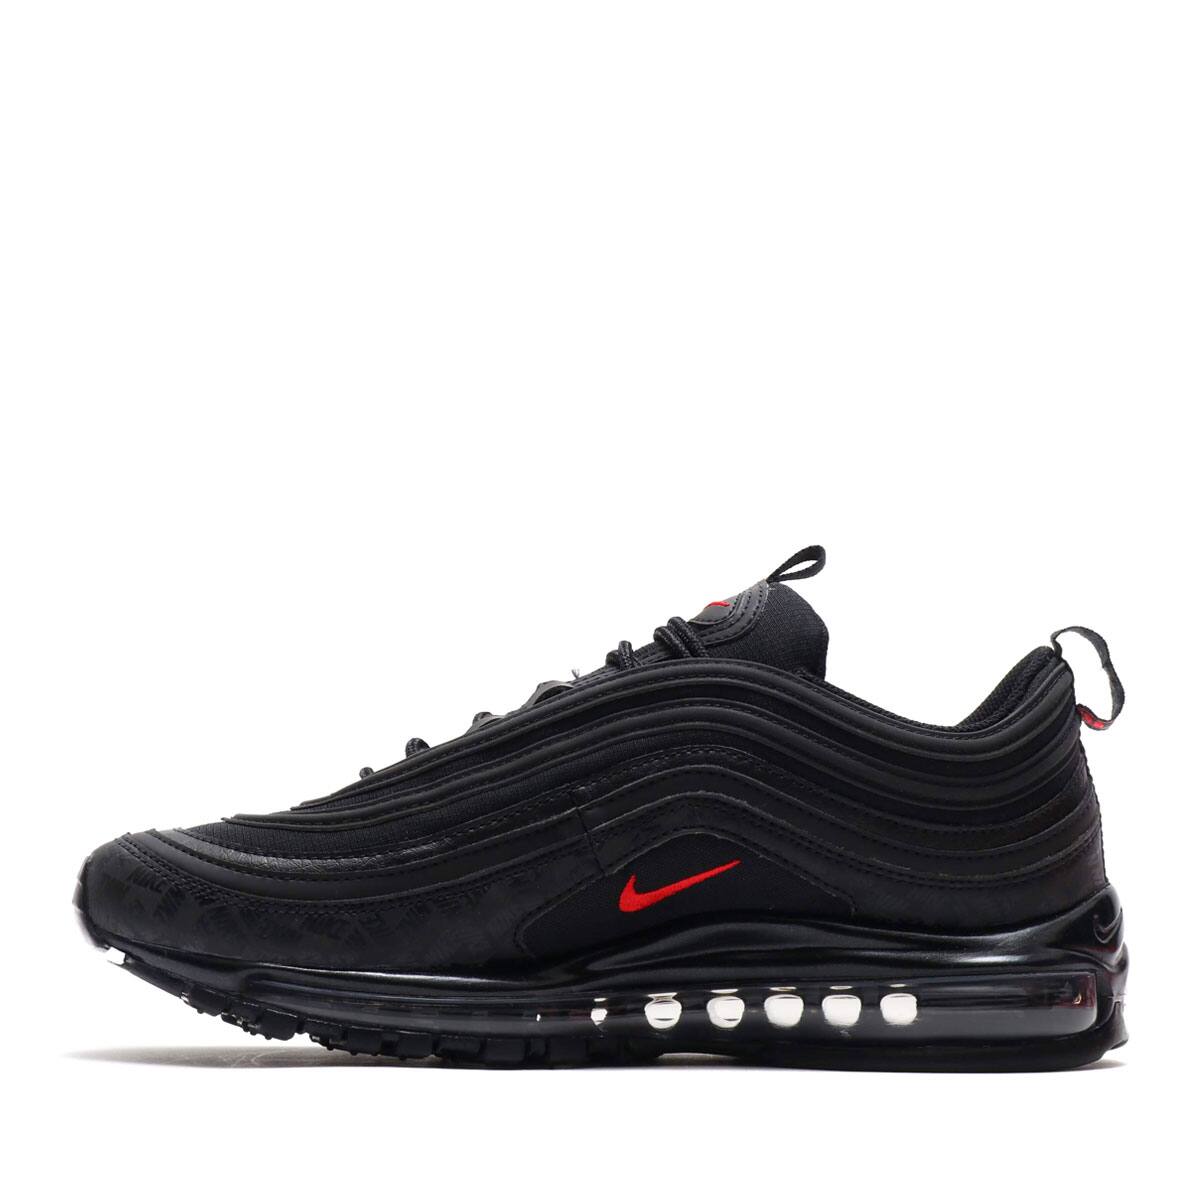 red and black 97